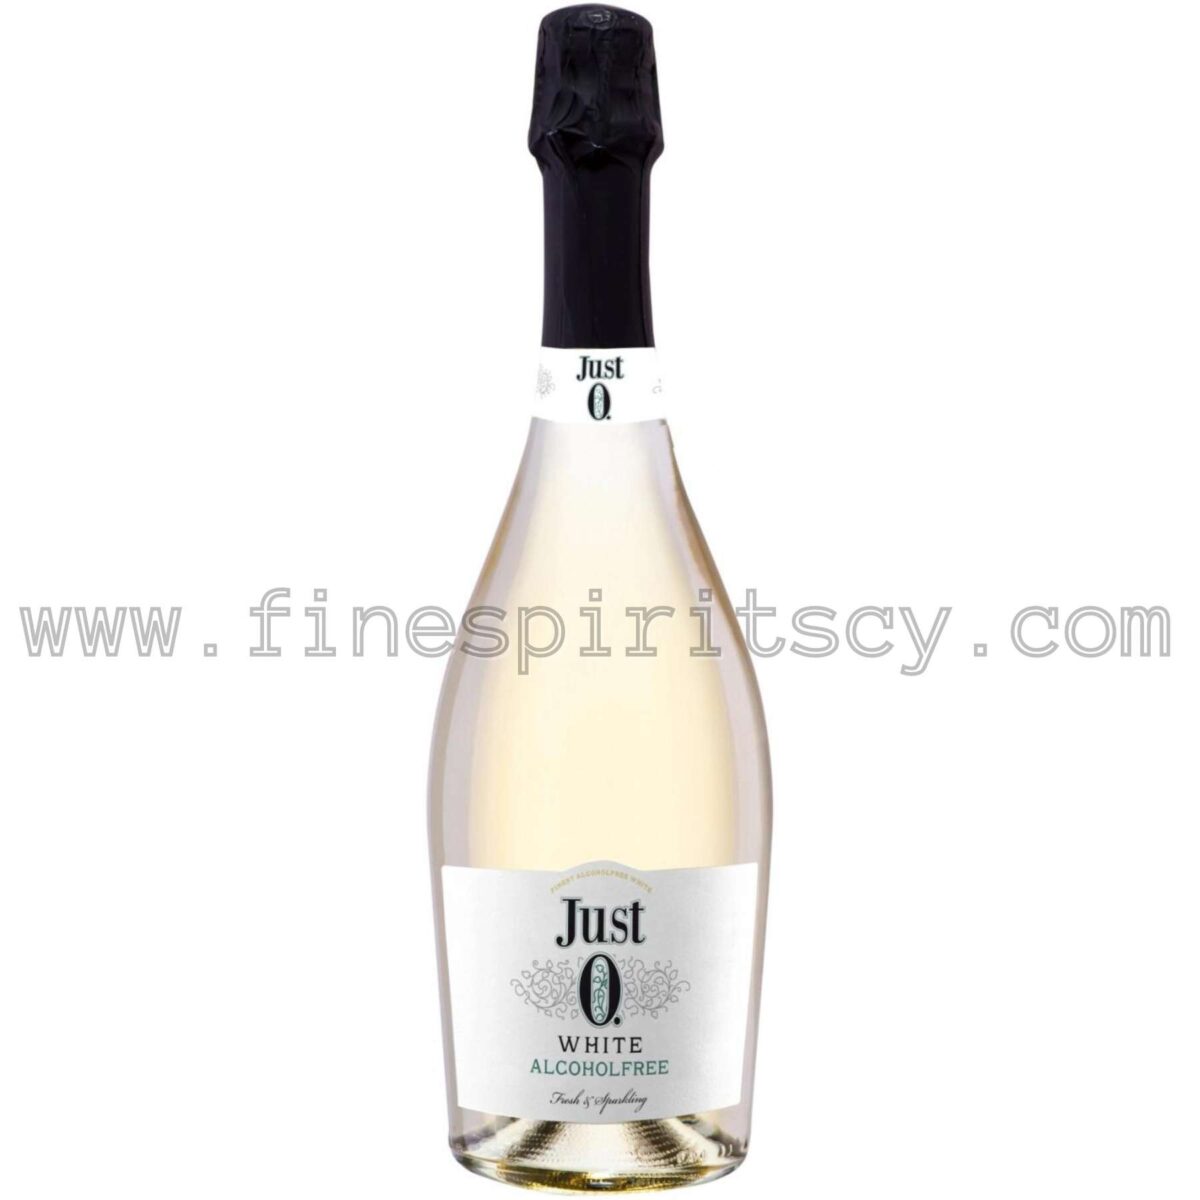 Just 0 Alcohol Free White Sparkling Secco Wine Cyprus Price Order Online